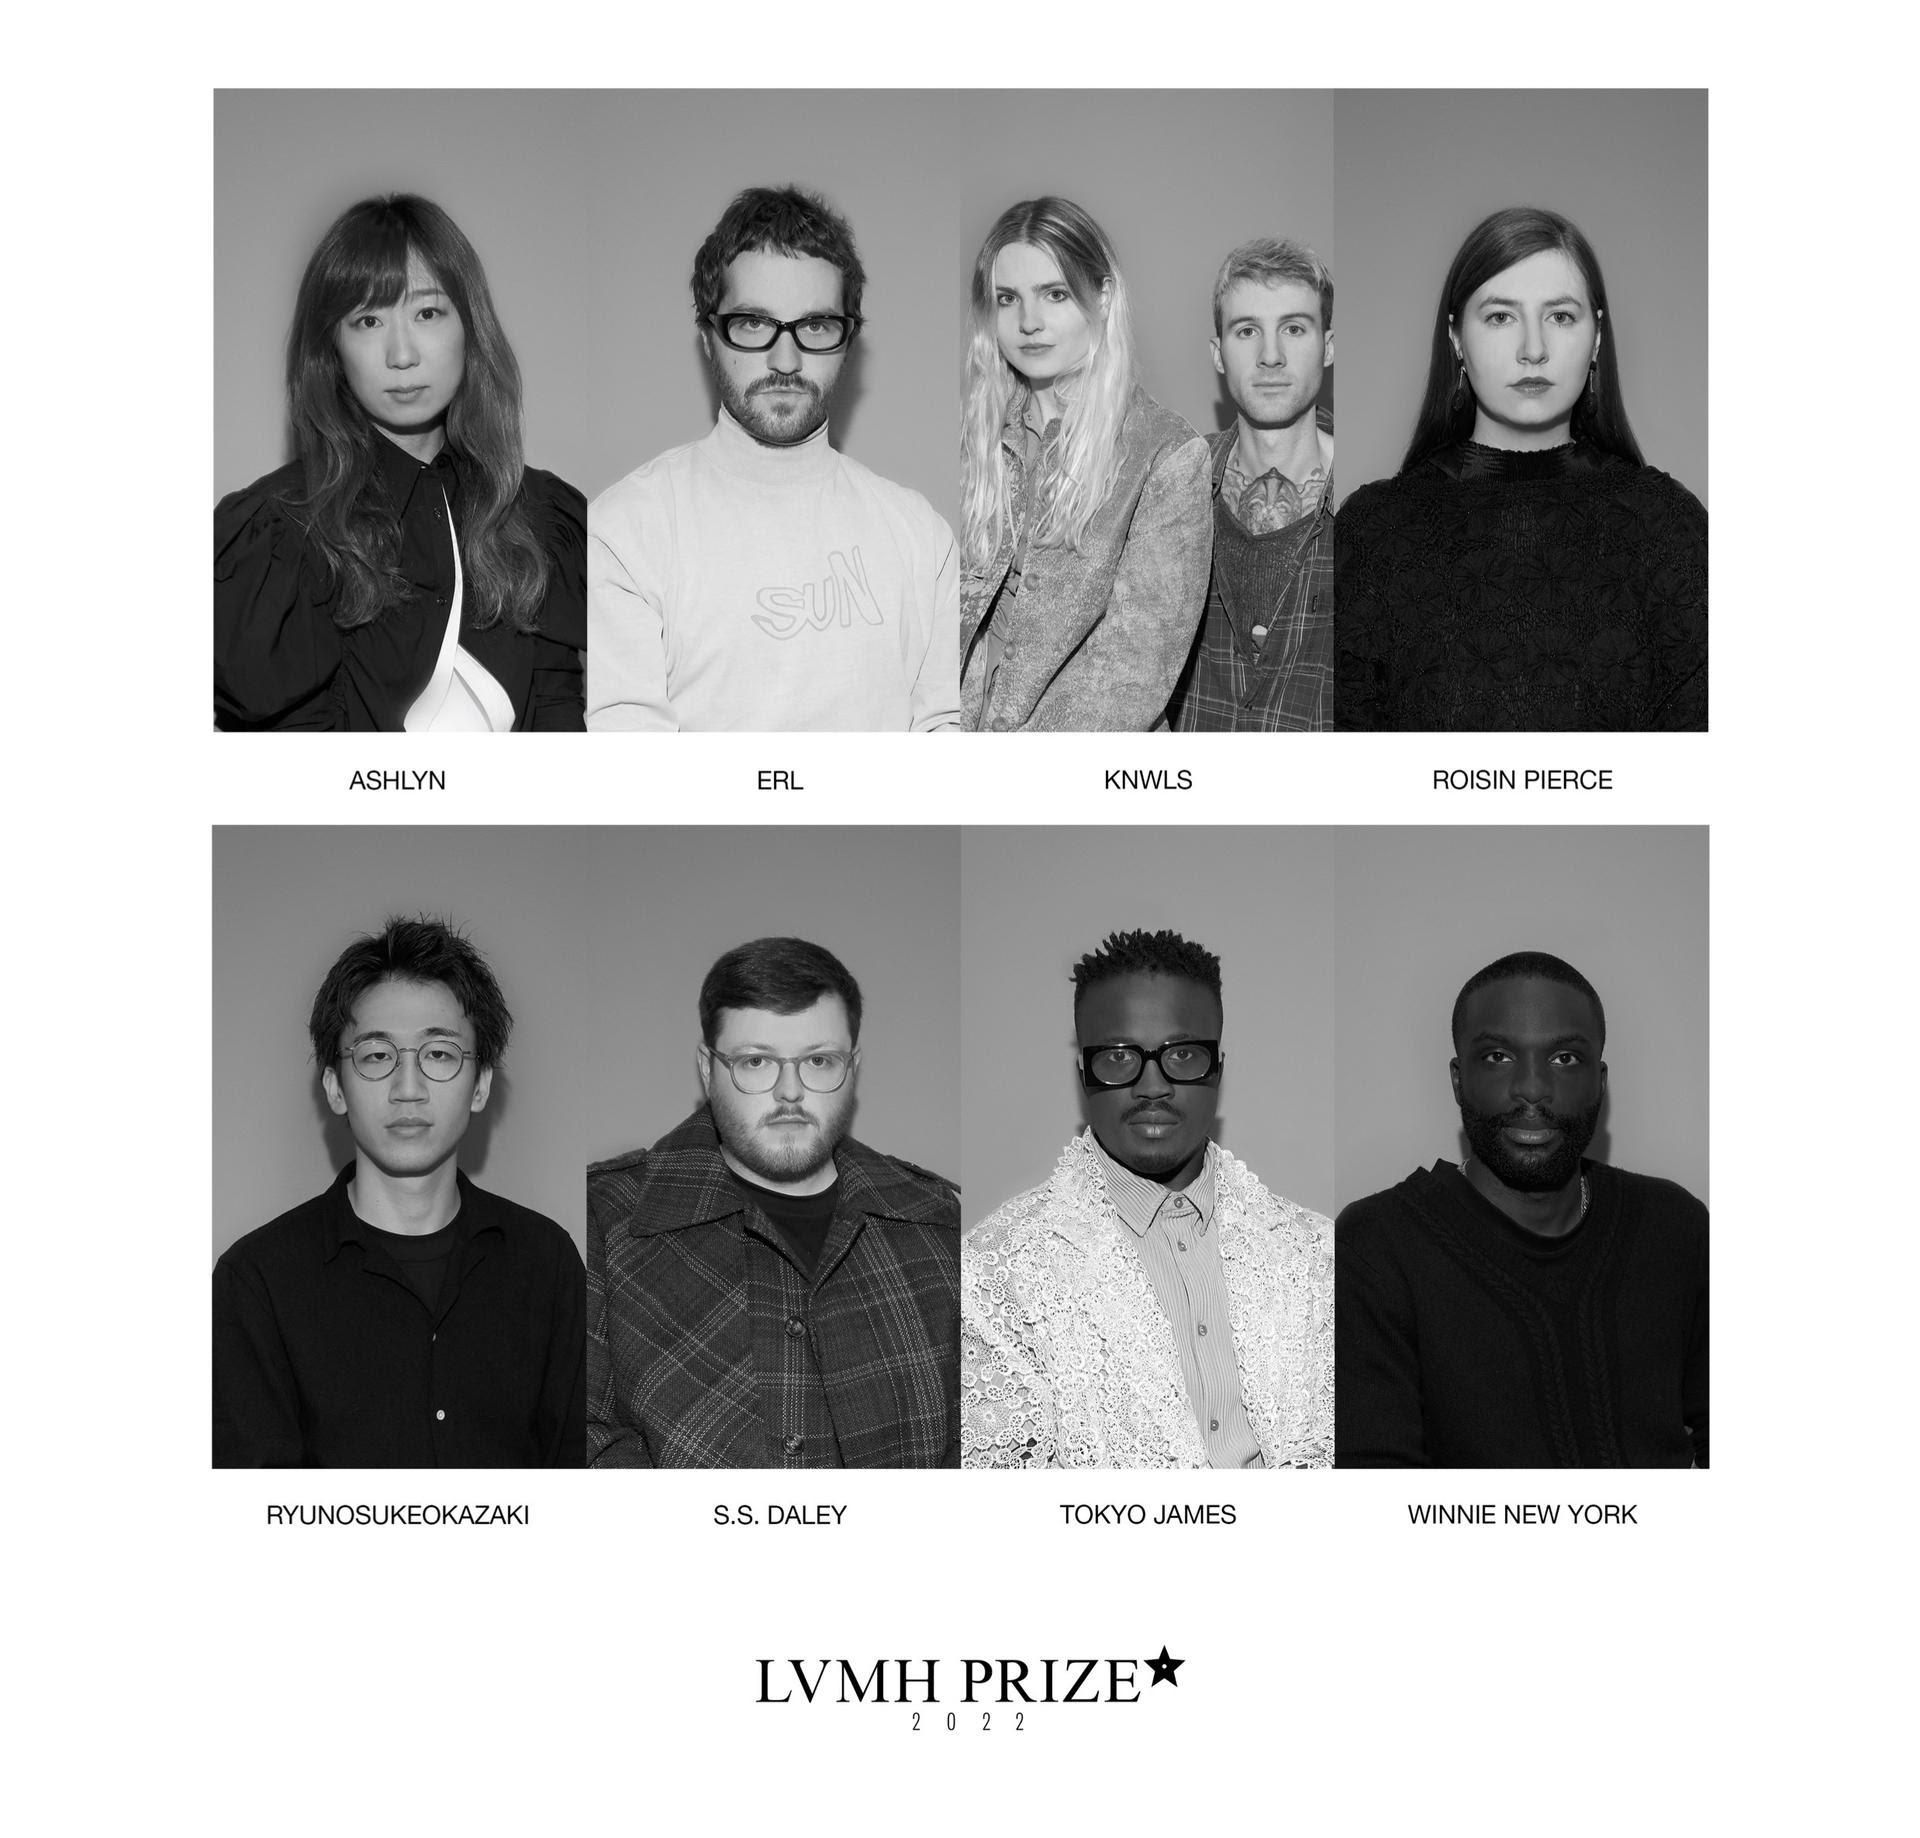 Meet The 8 Finalists For The LVMH Prize